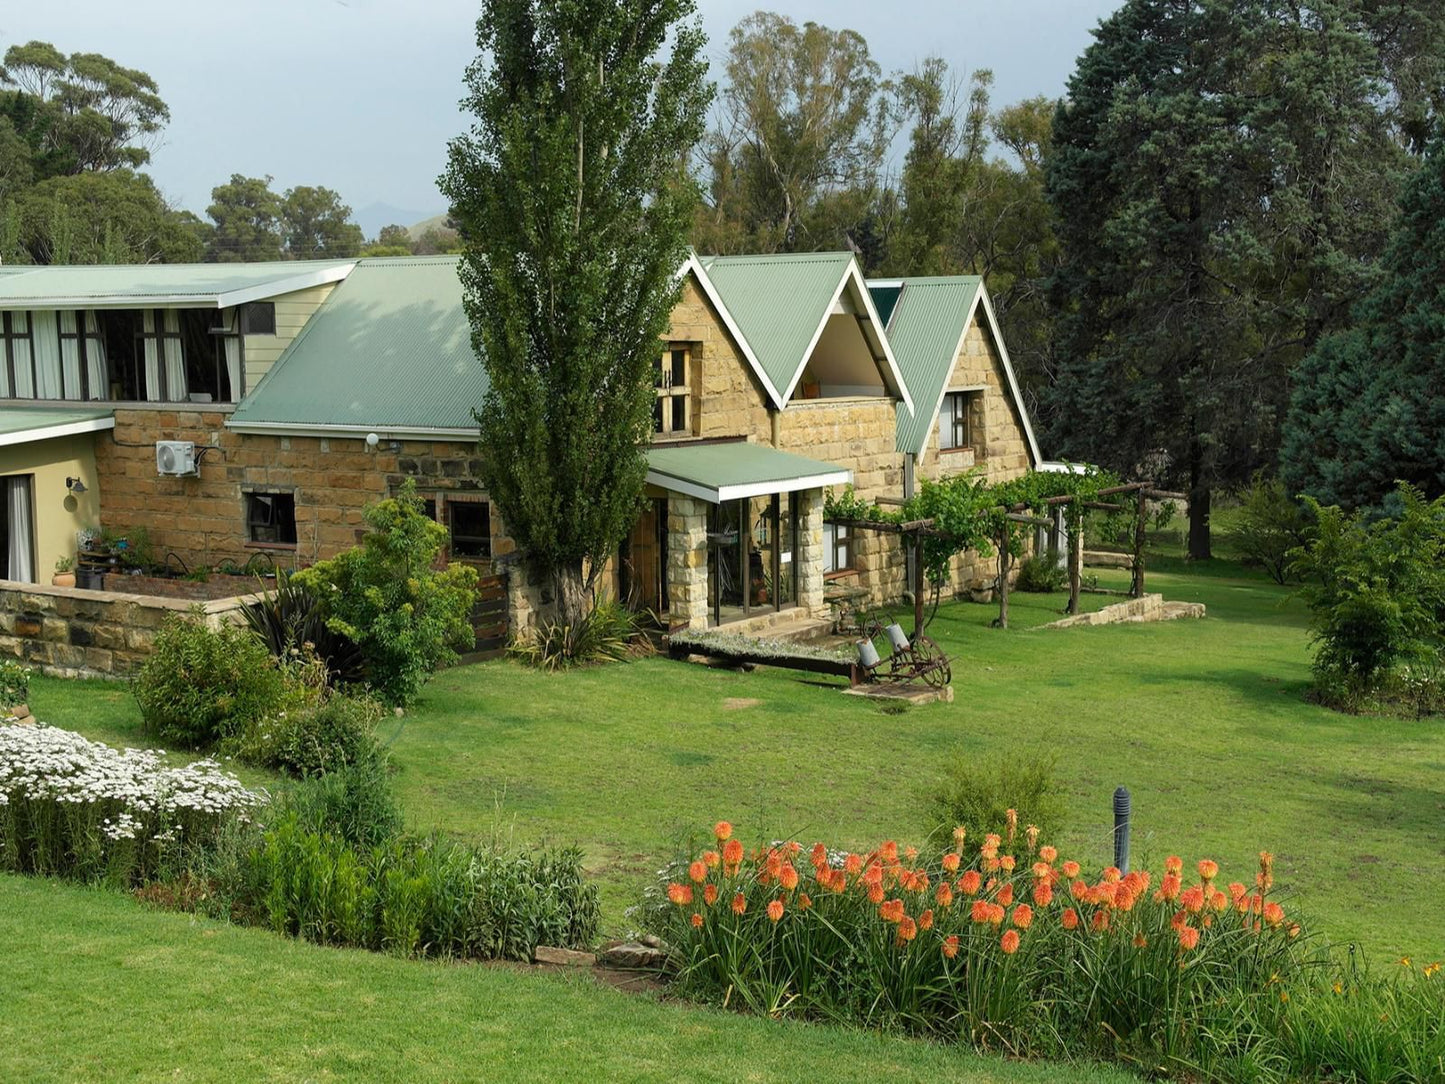 The Clarens Country House Clarens Free State South Africa Building, Architecture, House